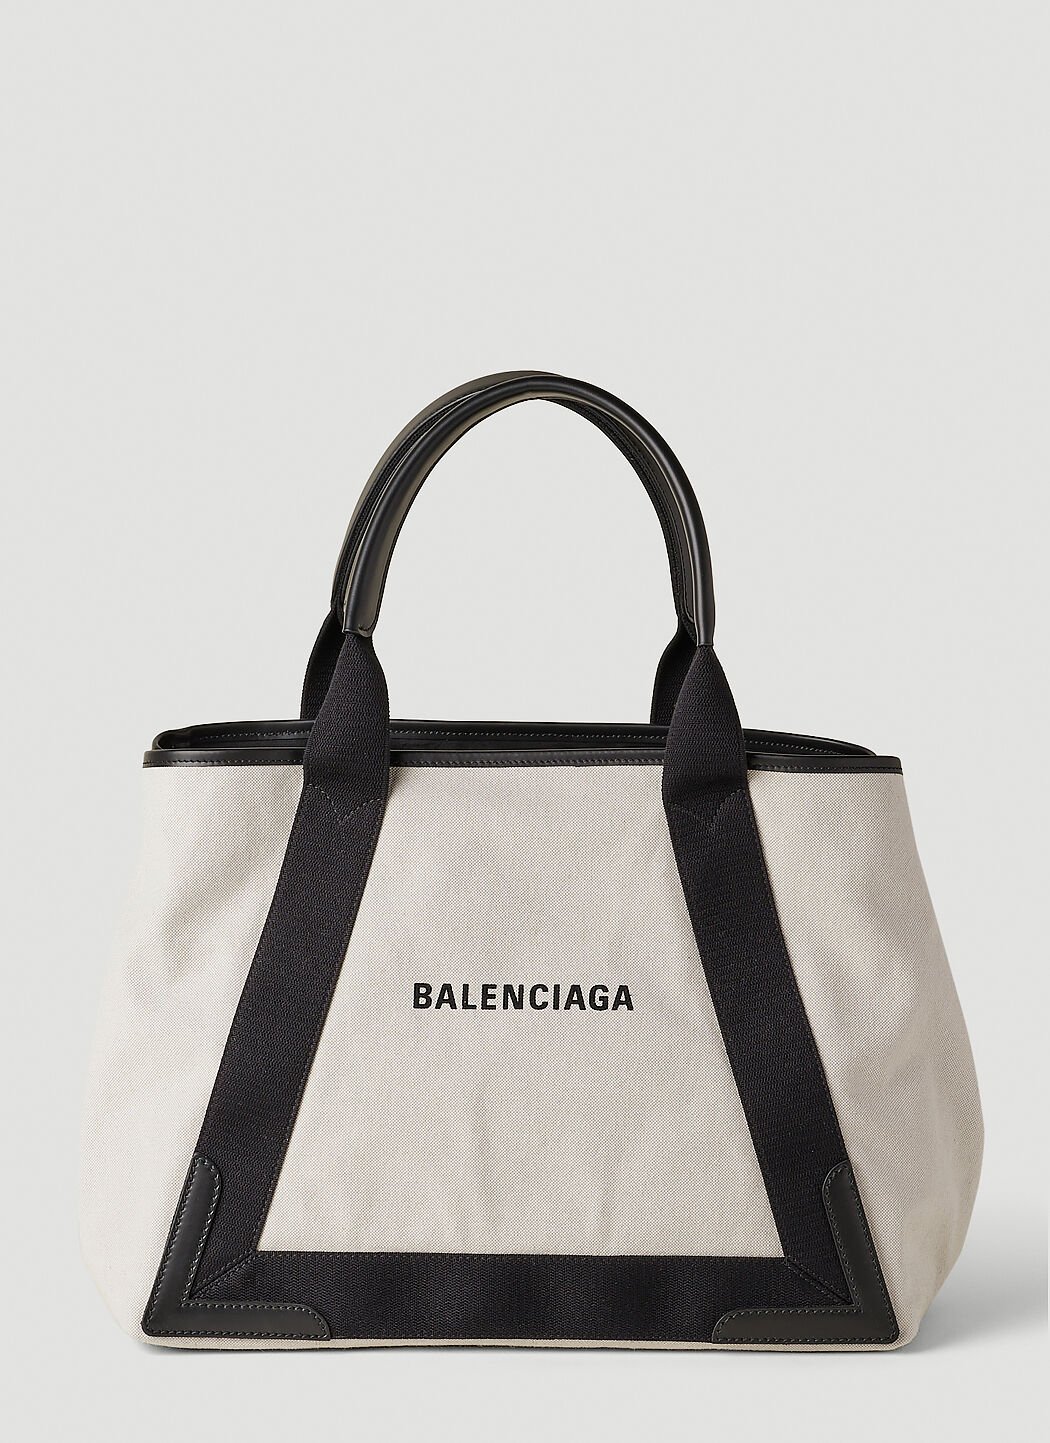 Balenciaga Navy Cabas Tote Bag XS Black in Cotton CanvasCalfskin Leather   US